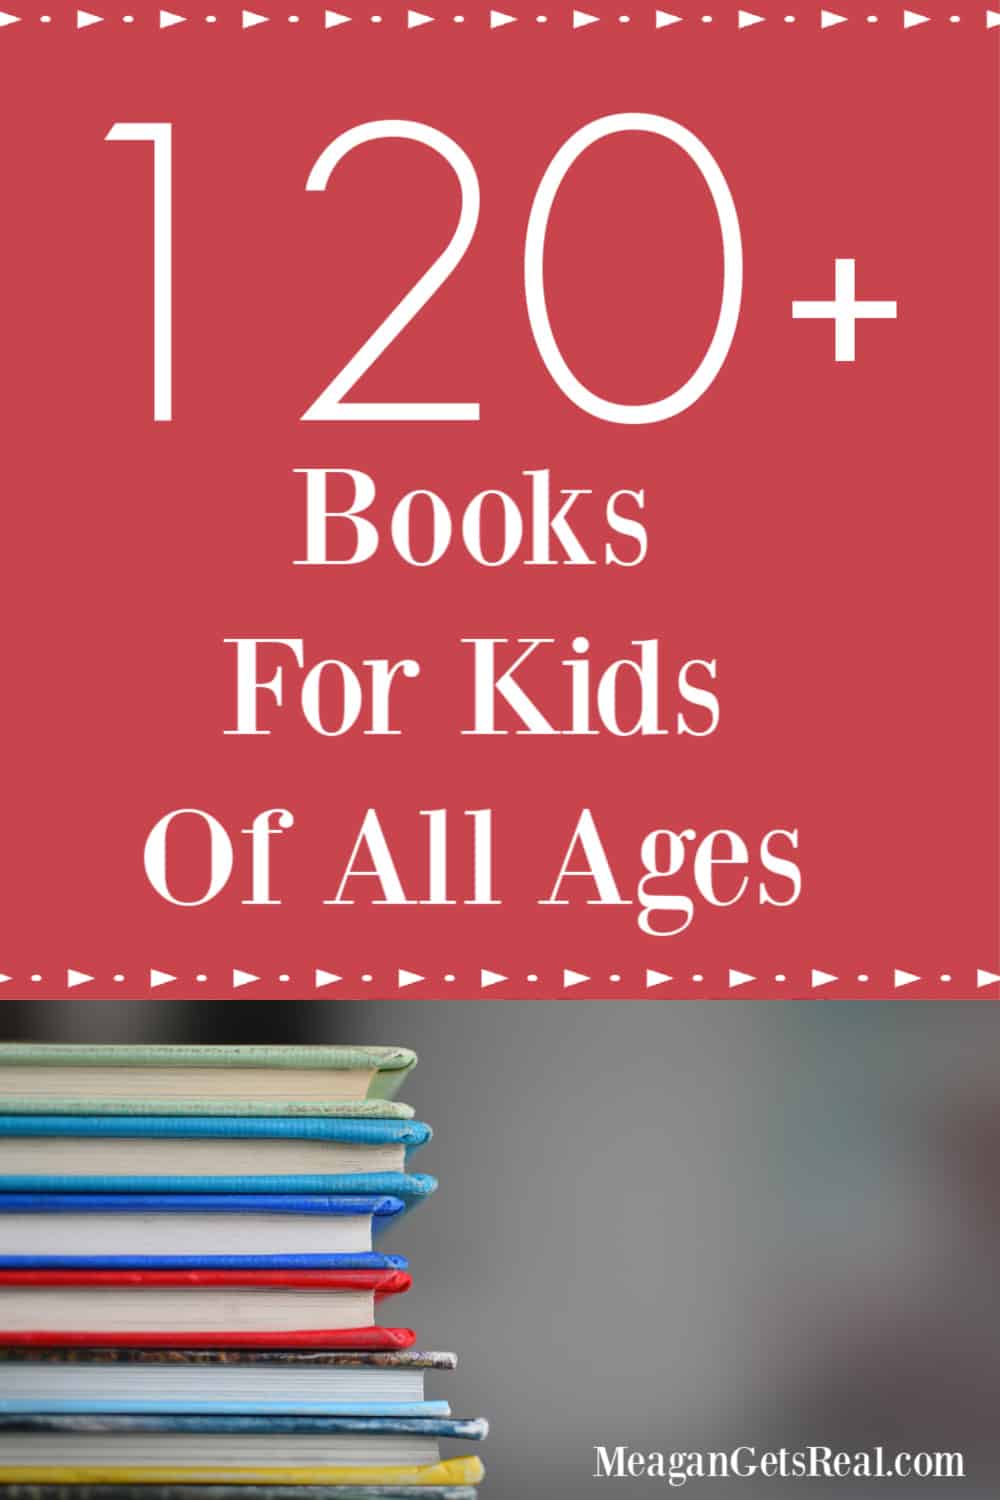 120+ Books for kids of all ages. - Books for summer reading, school breaks, or more reading opportunities for kids! Find these great books!